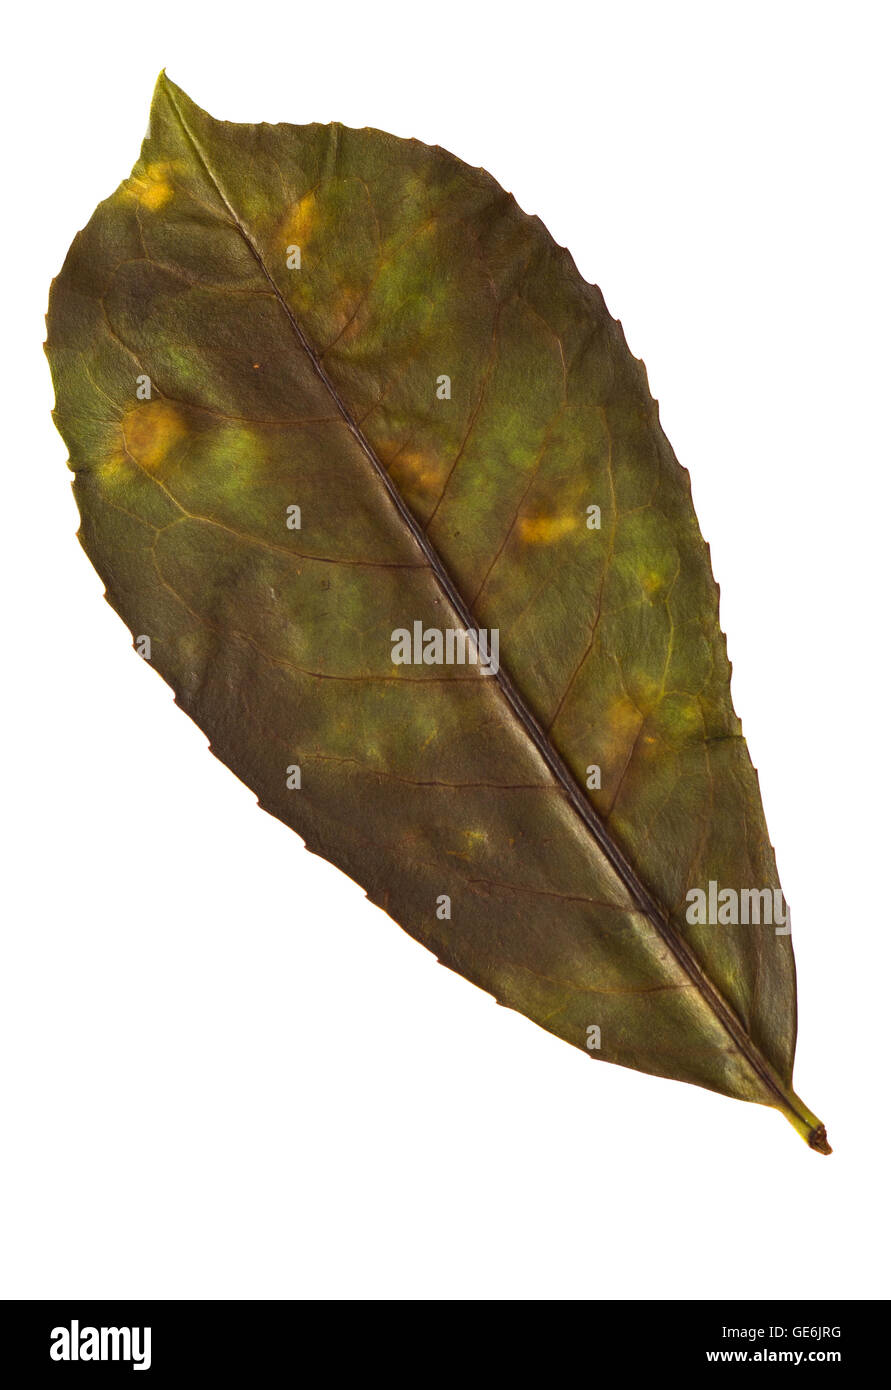 dried pressed leaf in obovate shape Stock Photo